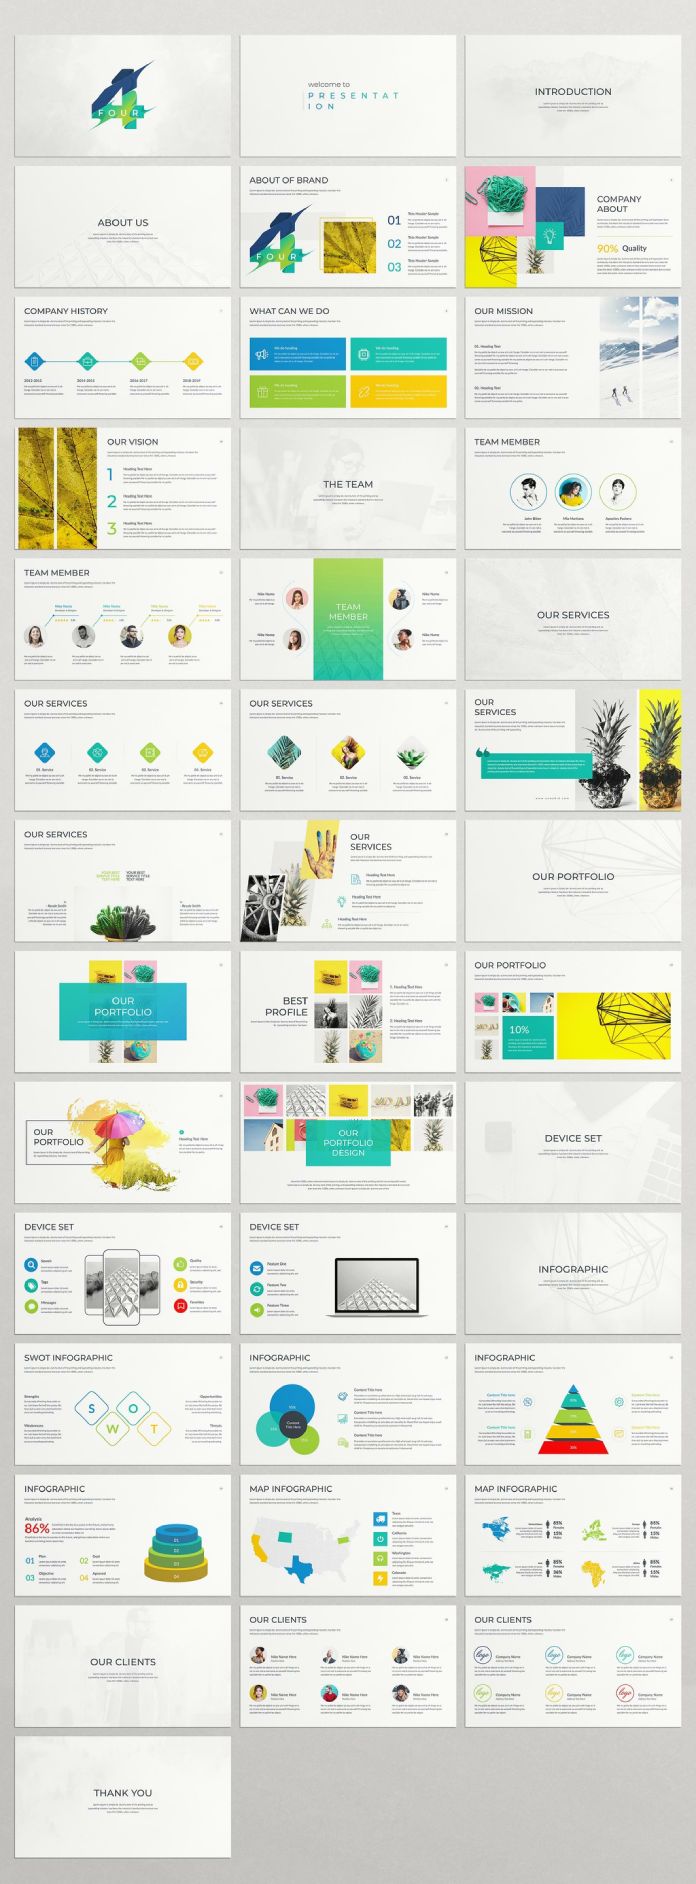 Professional Business Presentation Template for Adobe InDesign